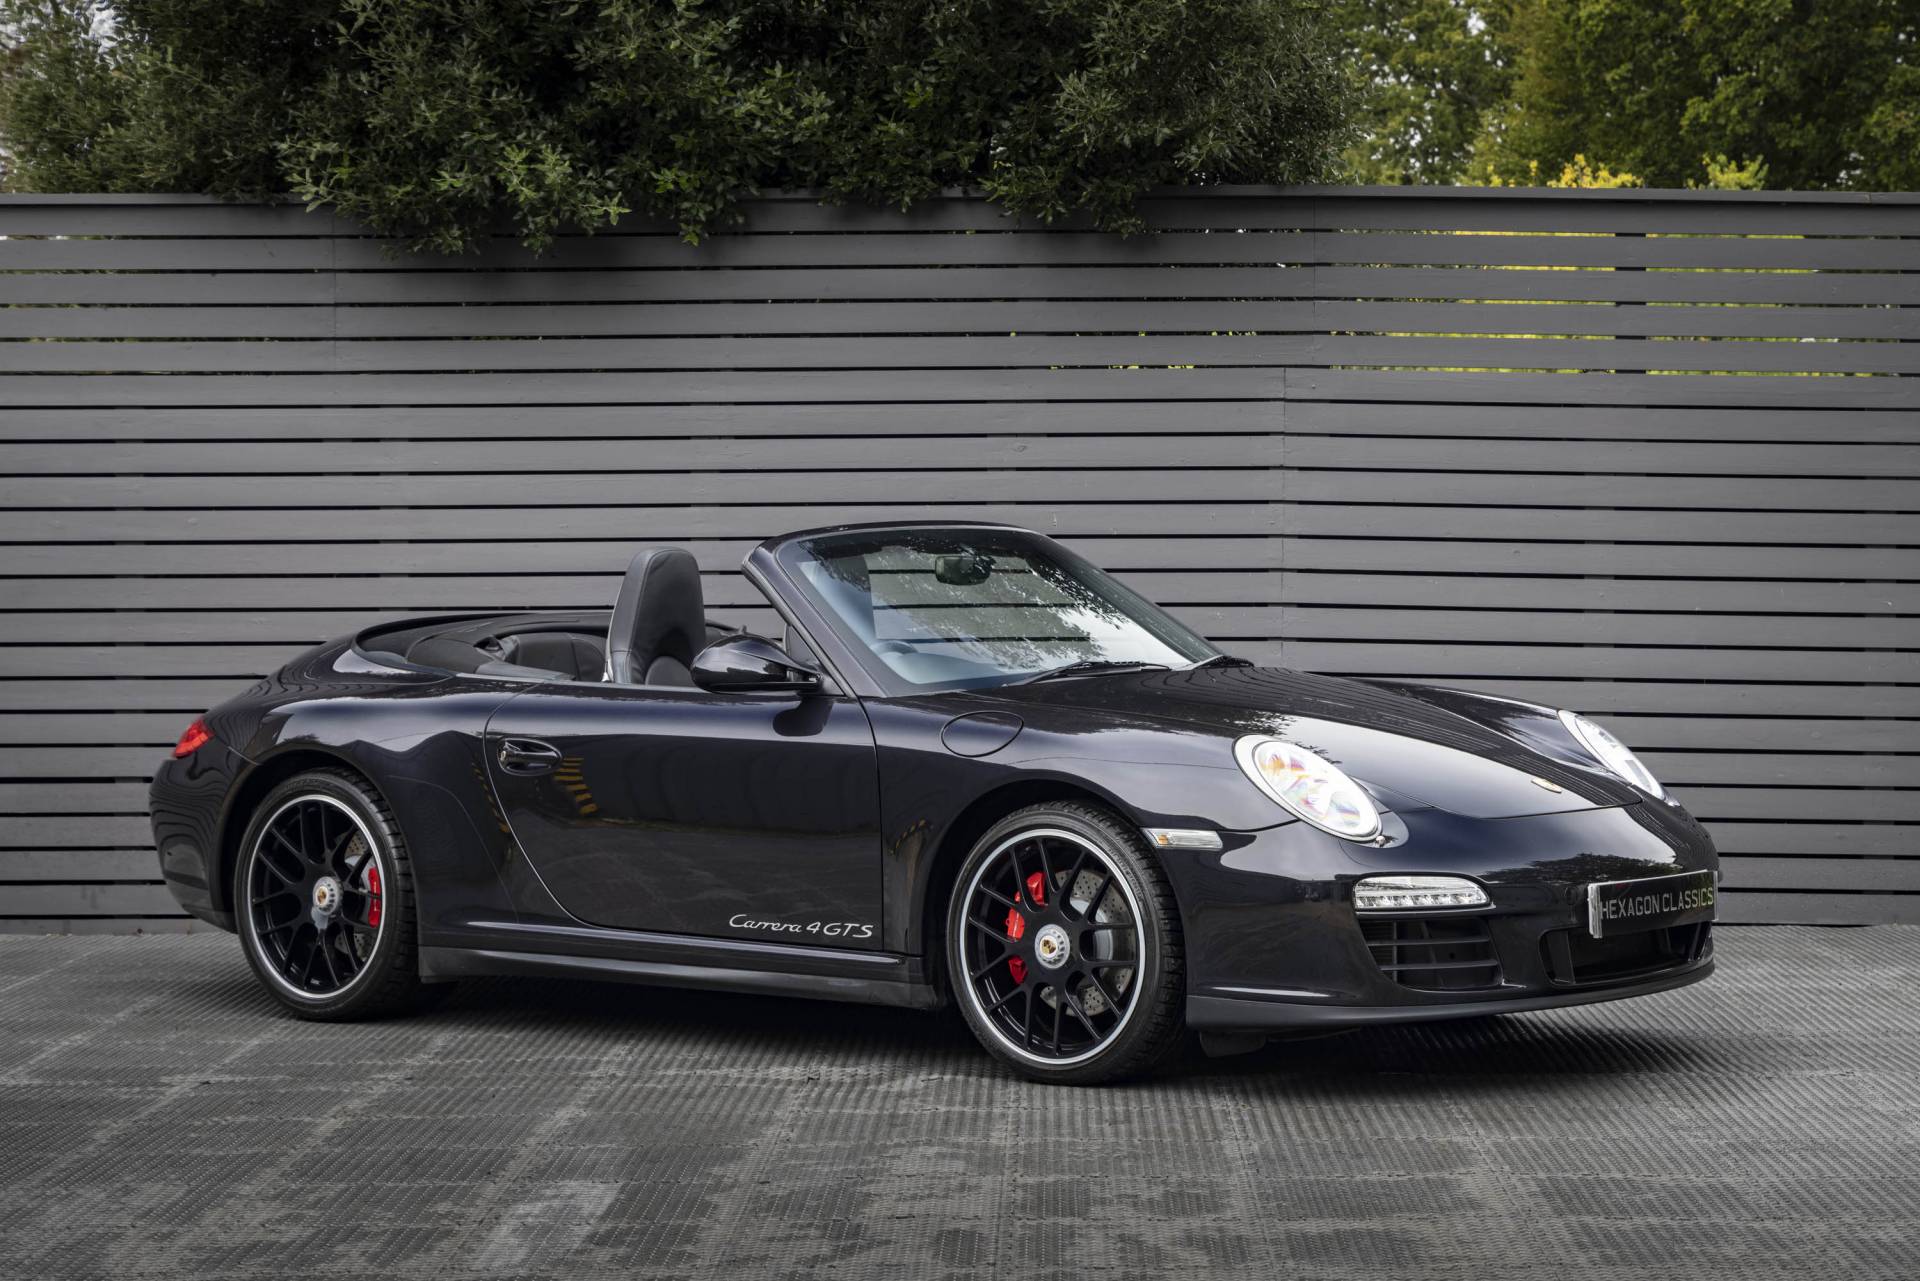 For Sale: Porsche 911 Carrera 4 GTS (2012) offered for $154,906